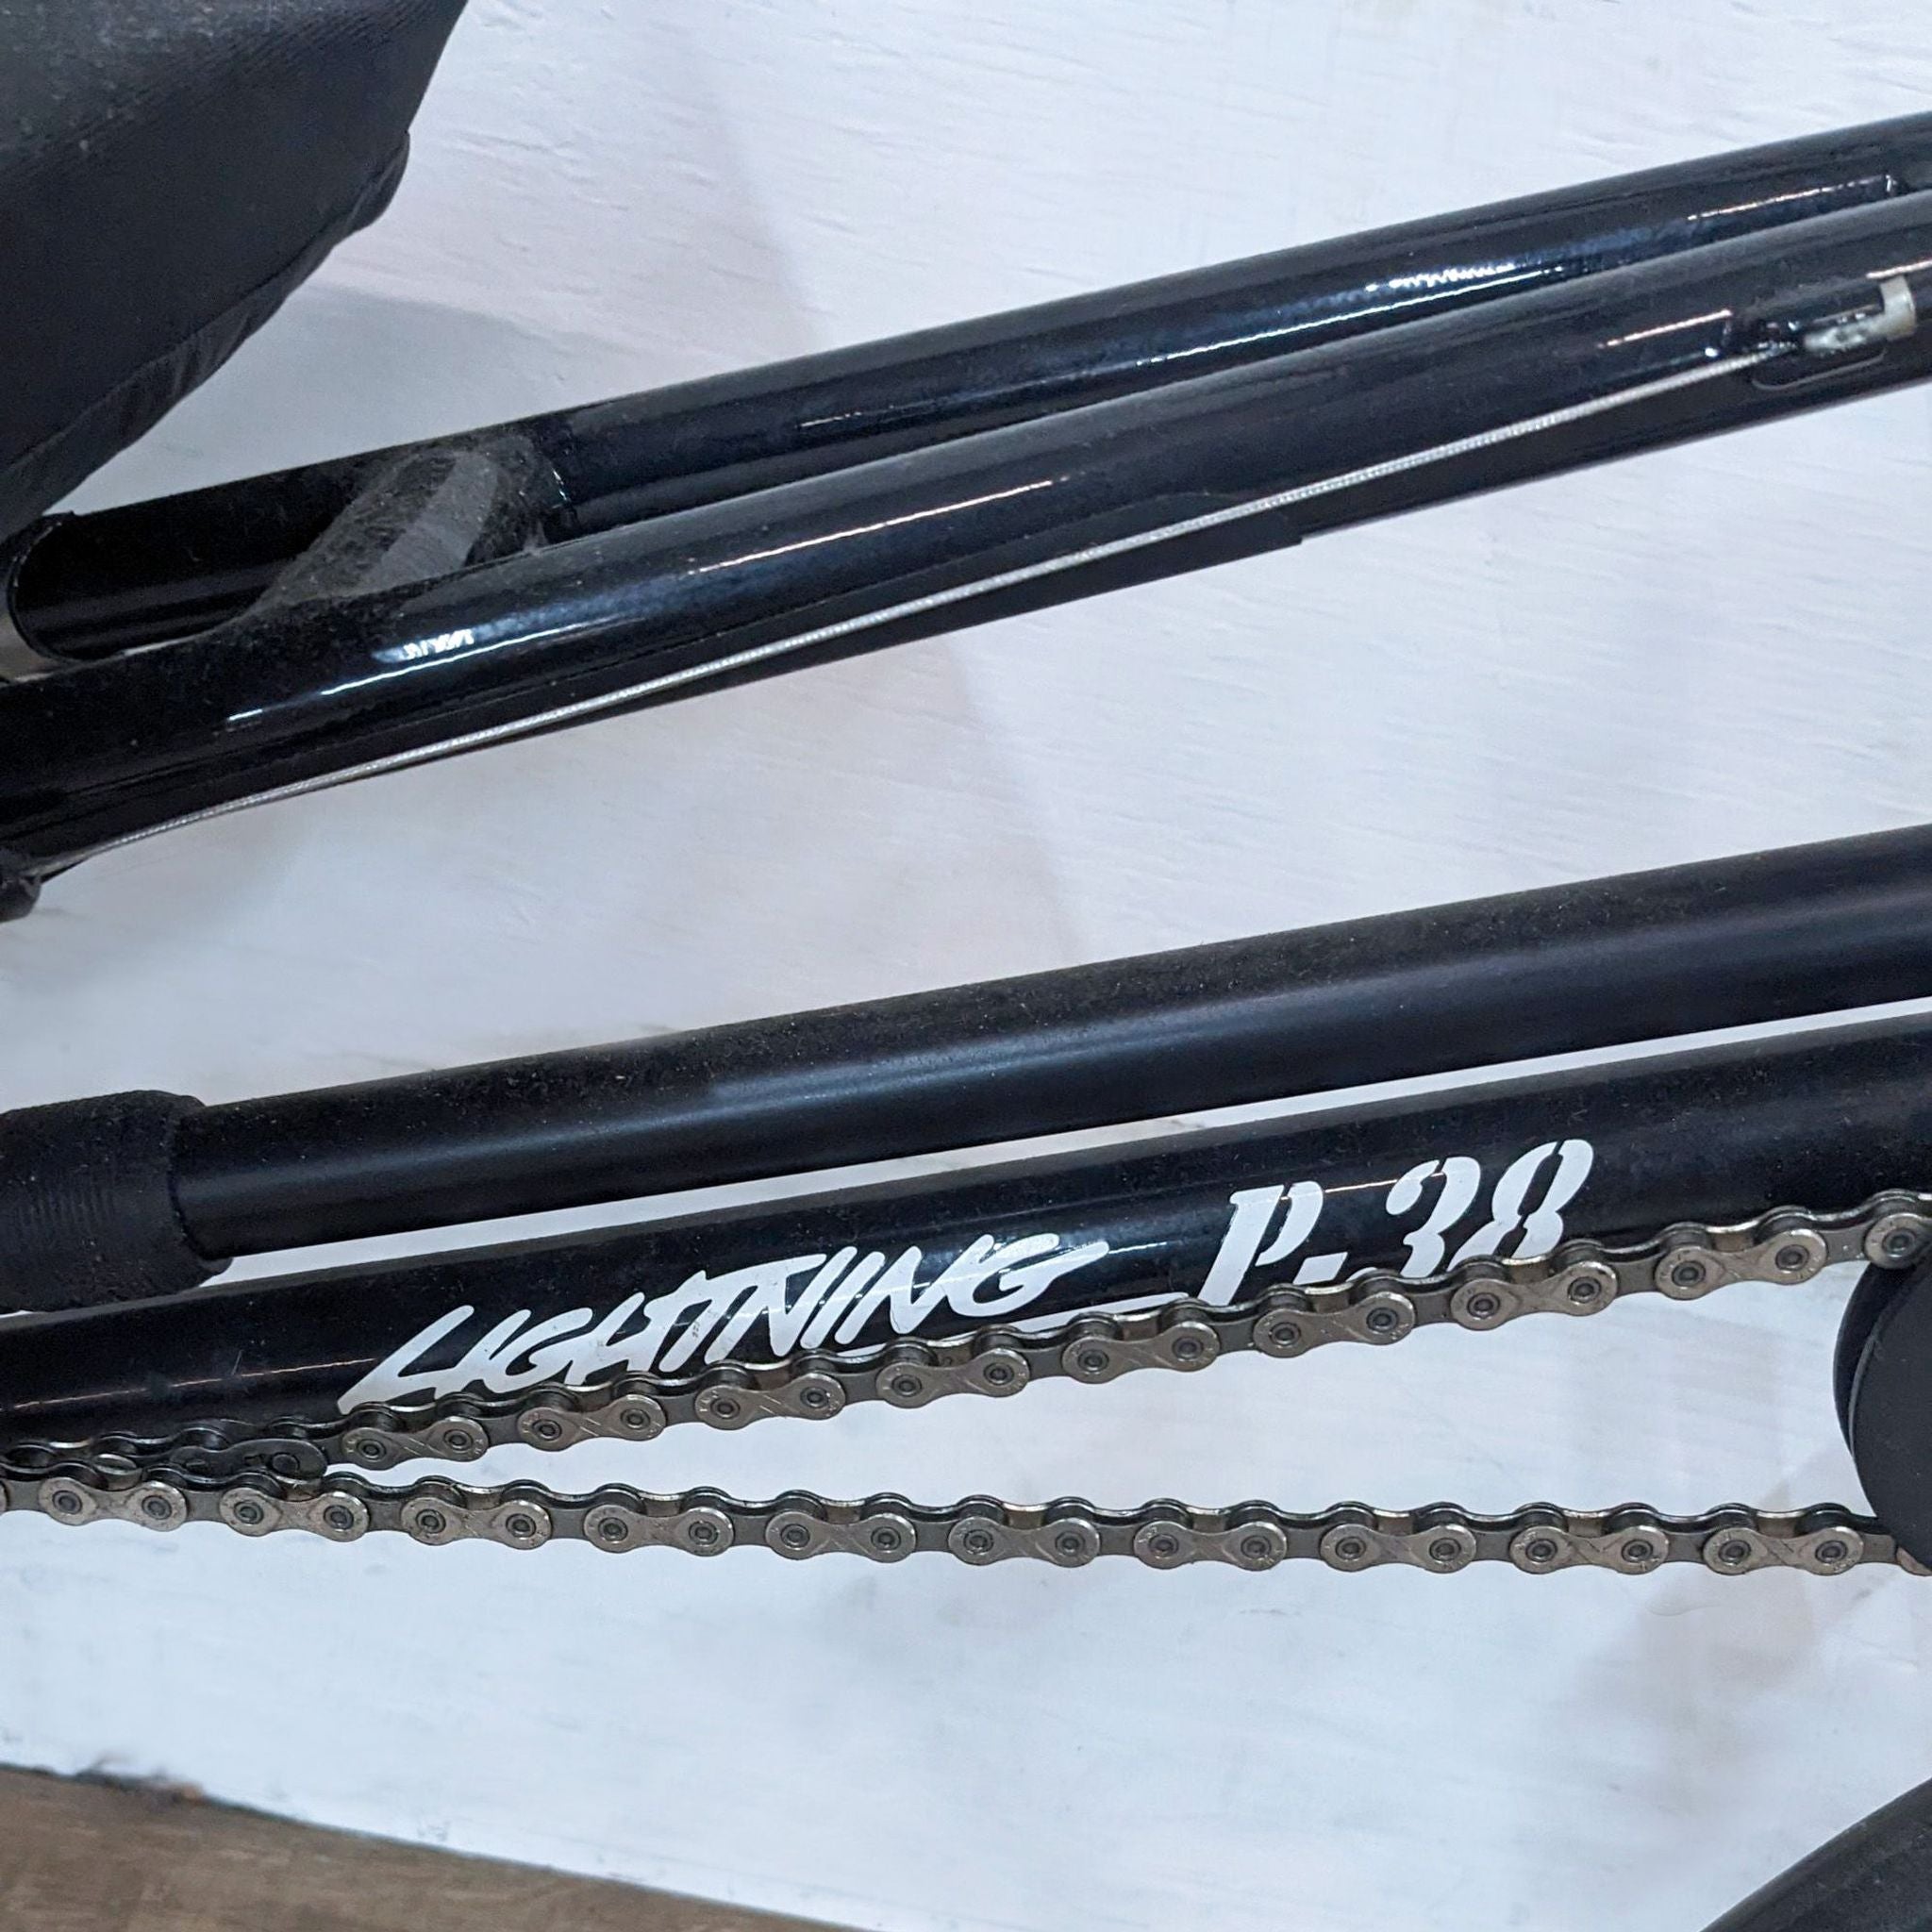 Alt text: Close-up of a black Lightning P-38 bicycle frame with visible bike chain and brand logo.